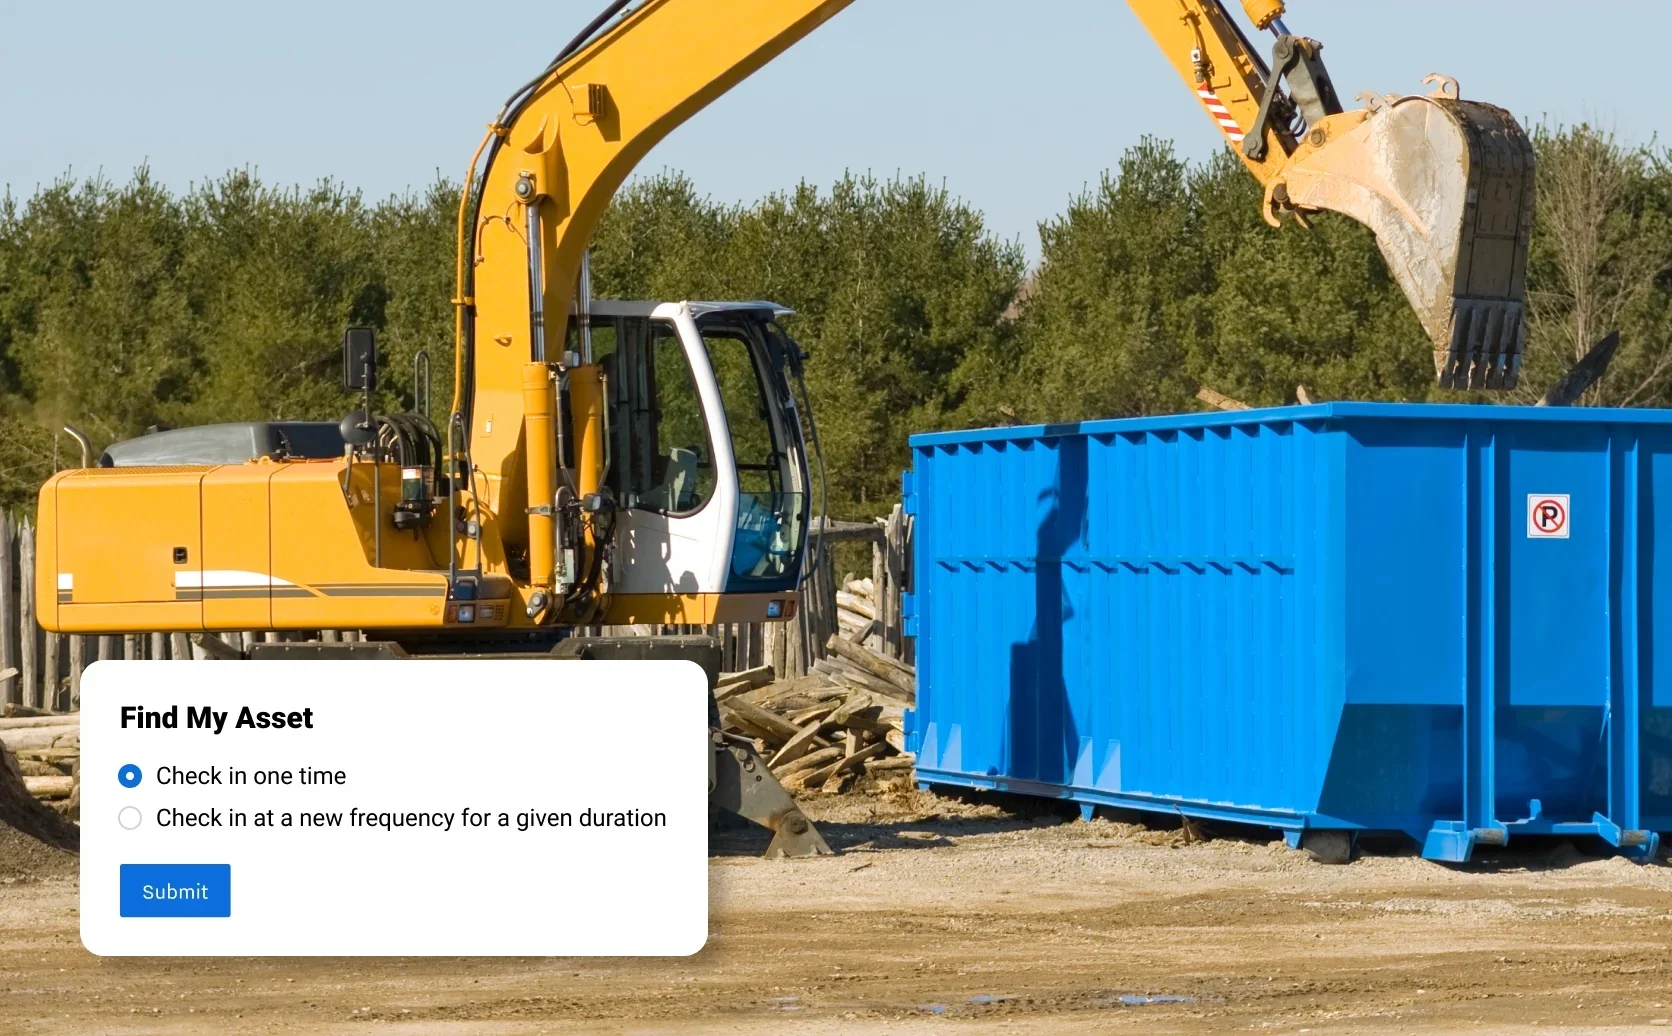 Excavator dumping material from a worksite into a large dumpster. Overlay shows Find My Asset feature. 